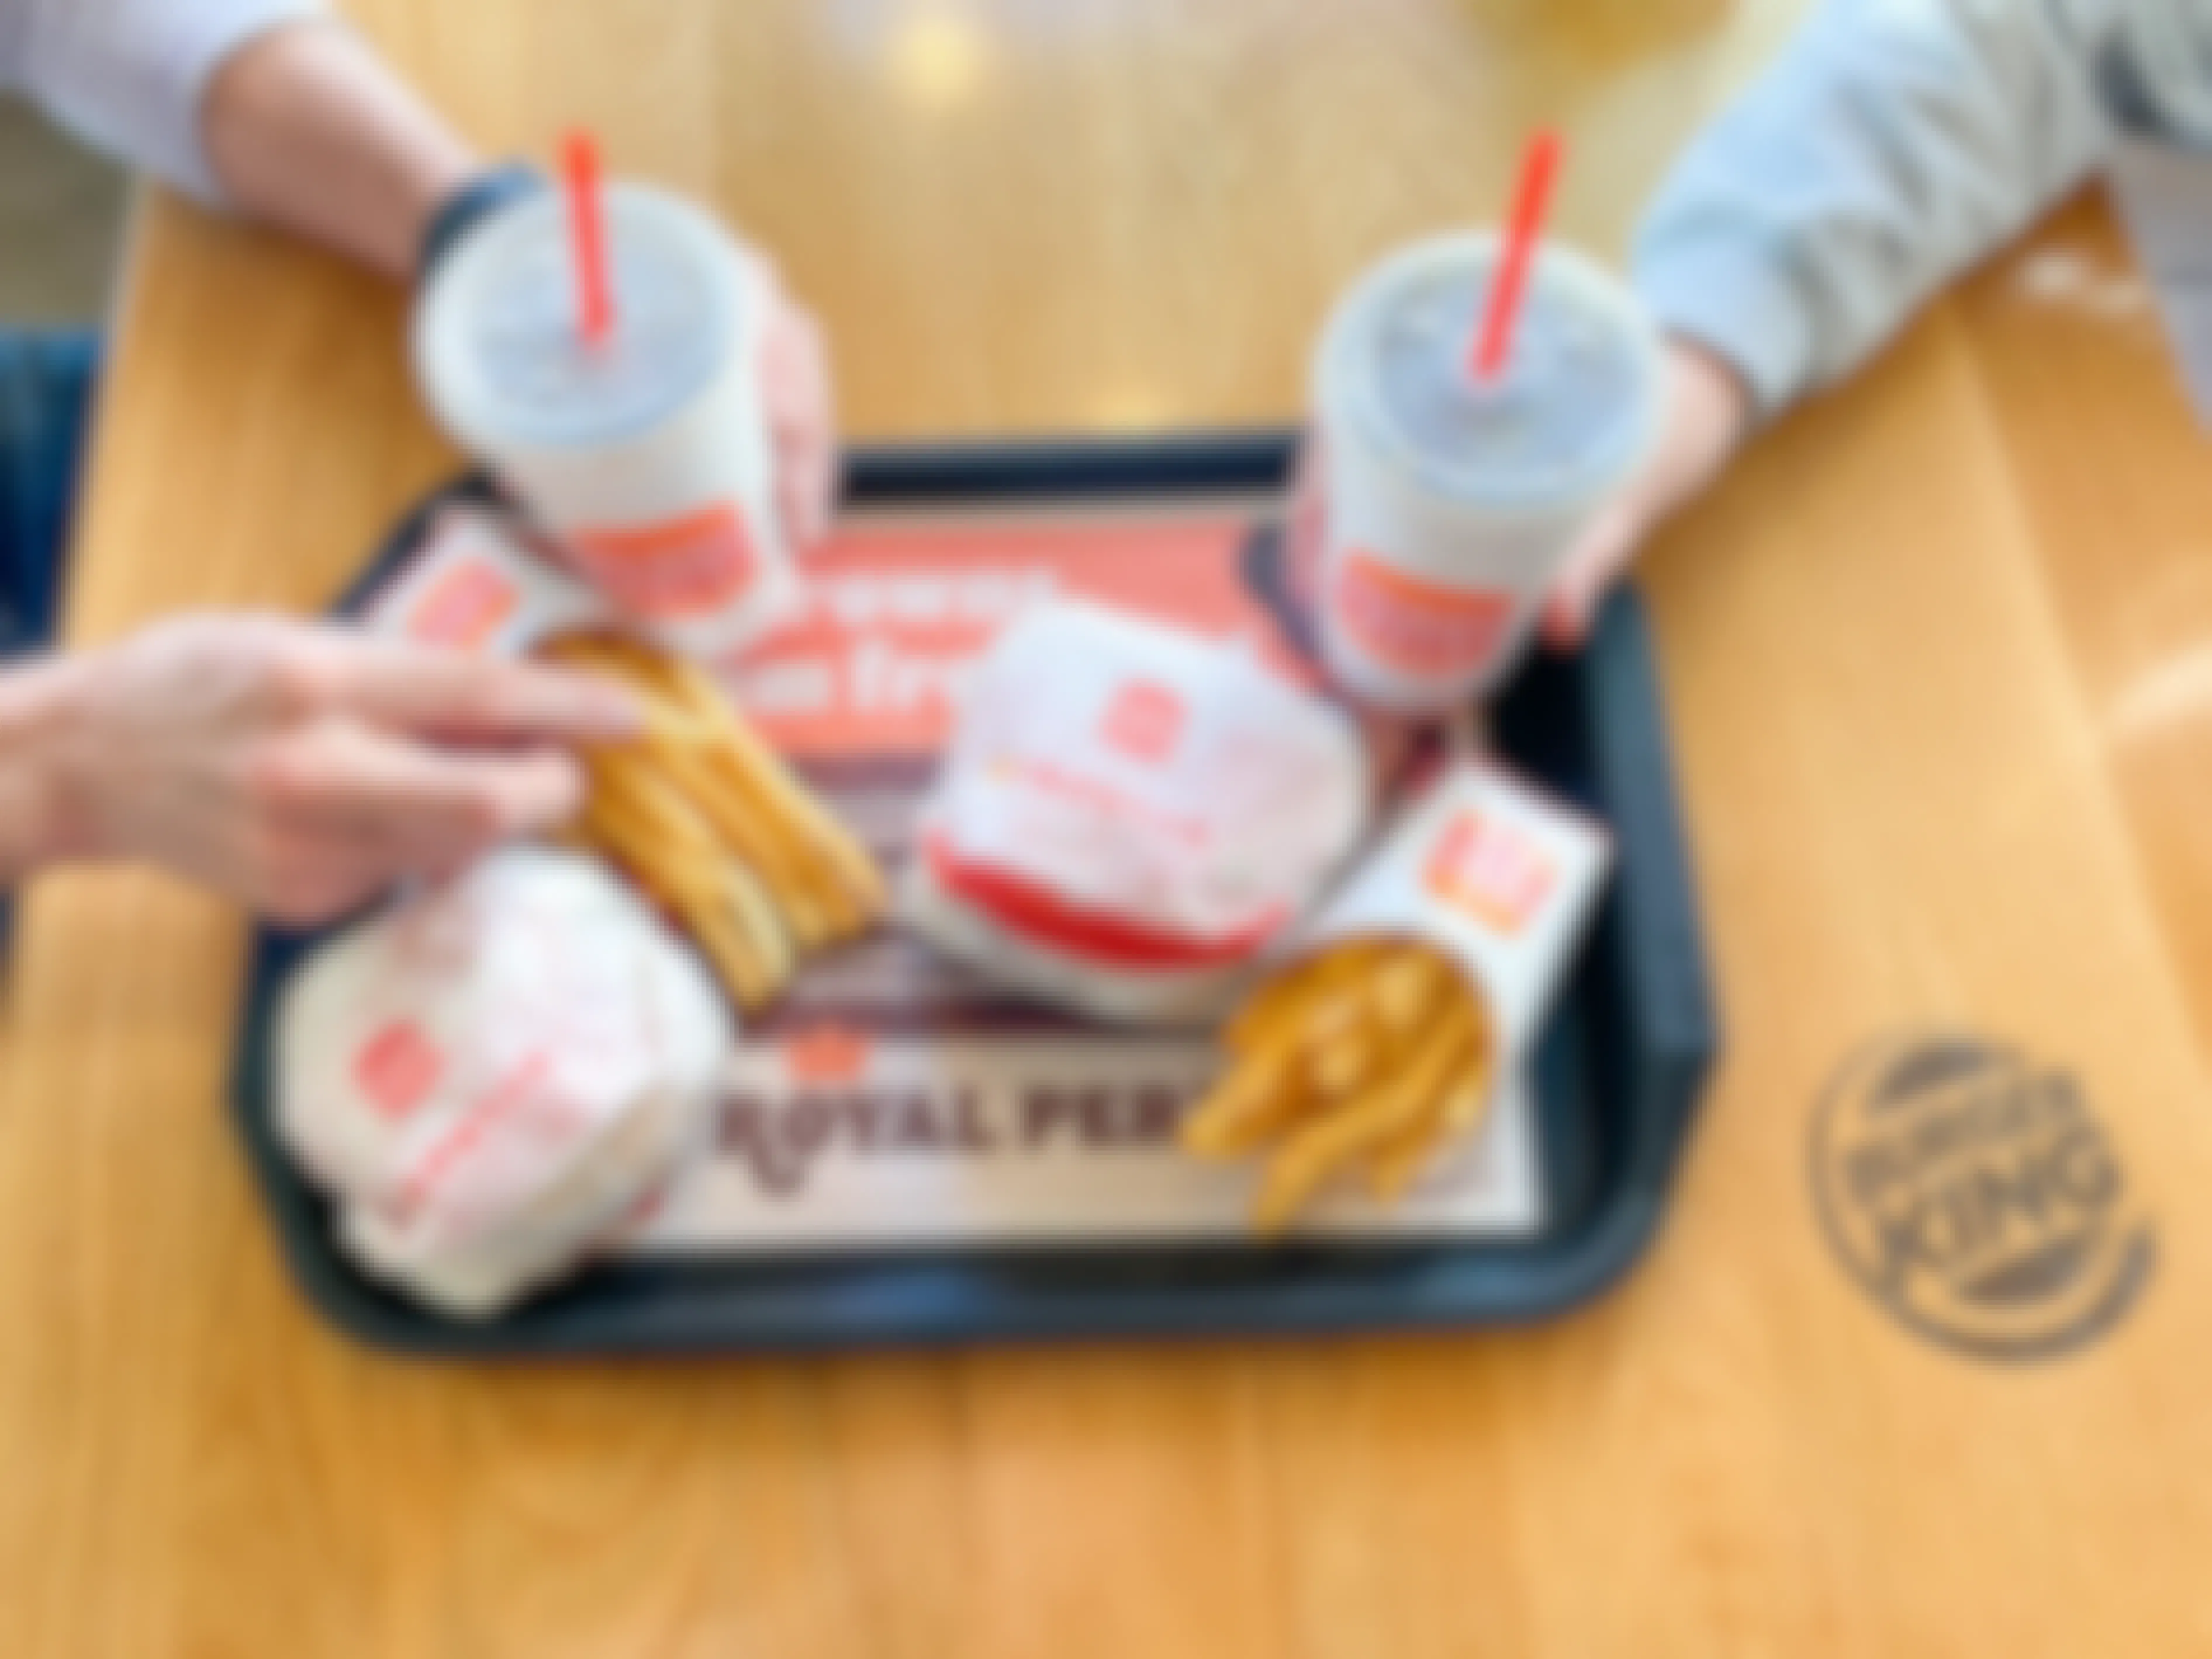 a tray with 2 burgers, 2 fries, and 2 drinks being grabbed by two people